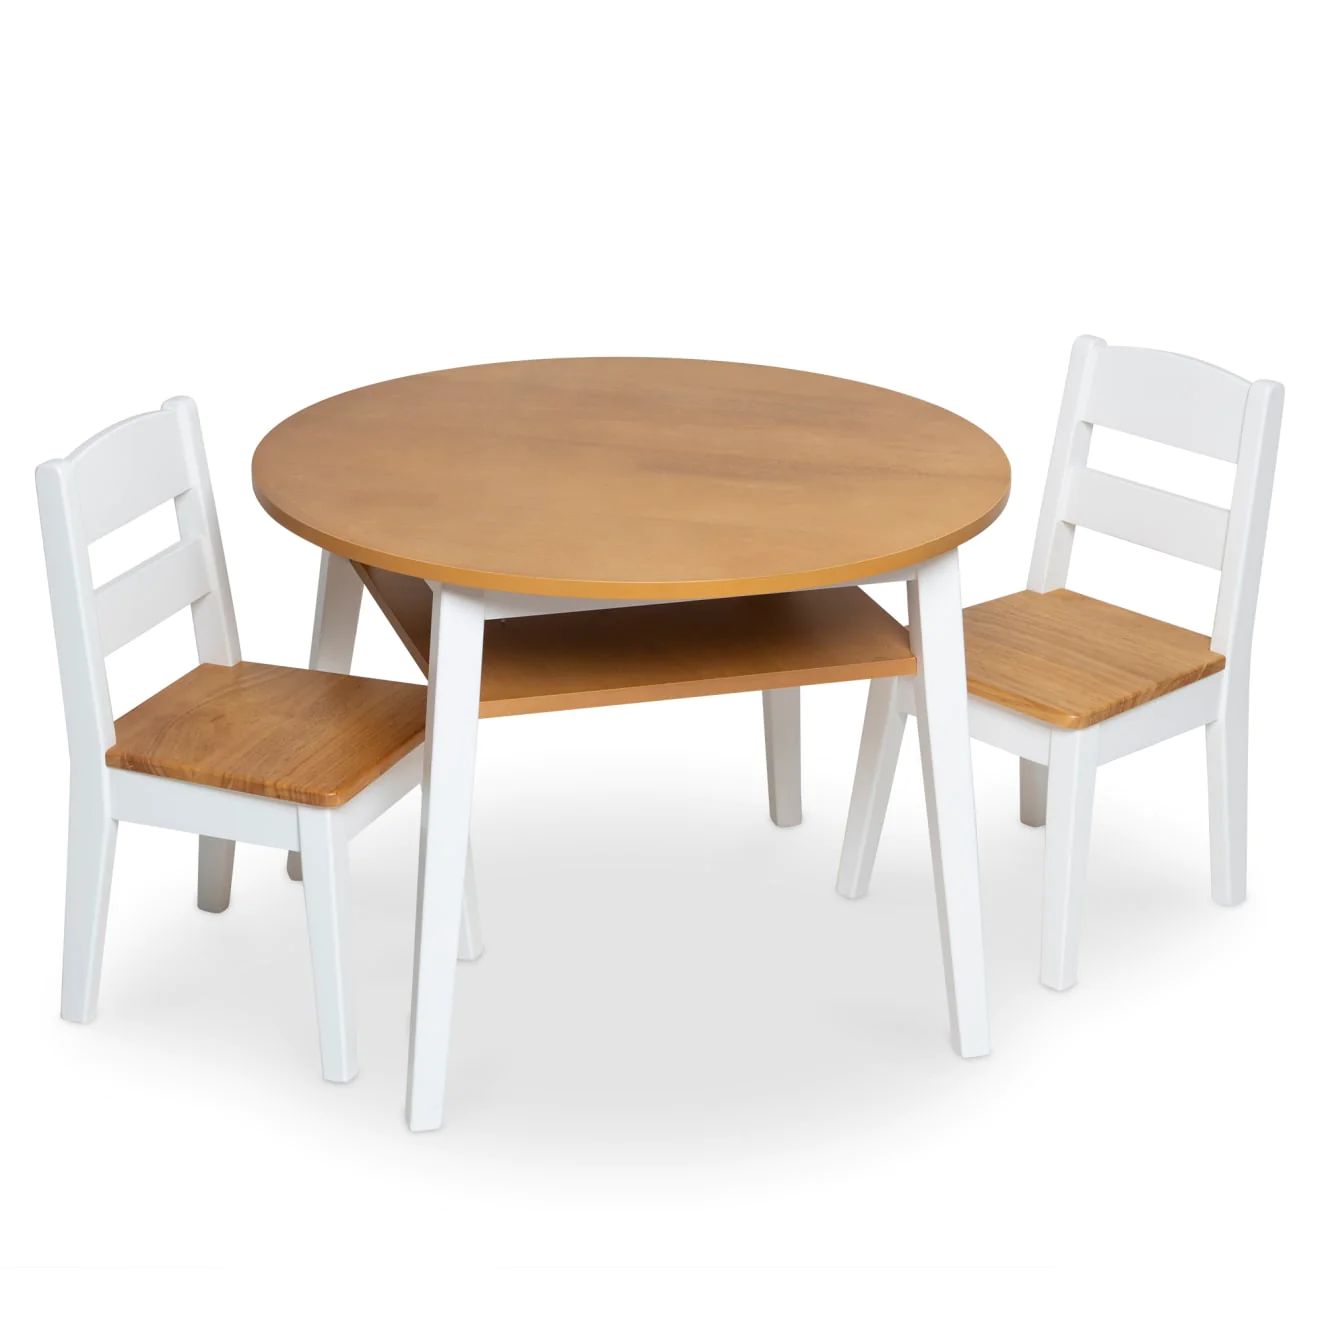 Wooden Round Table & Chairs Set | Melissa and Doug